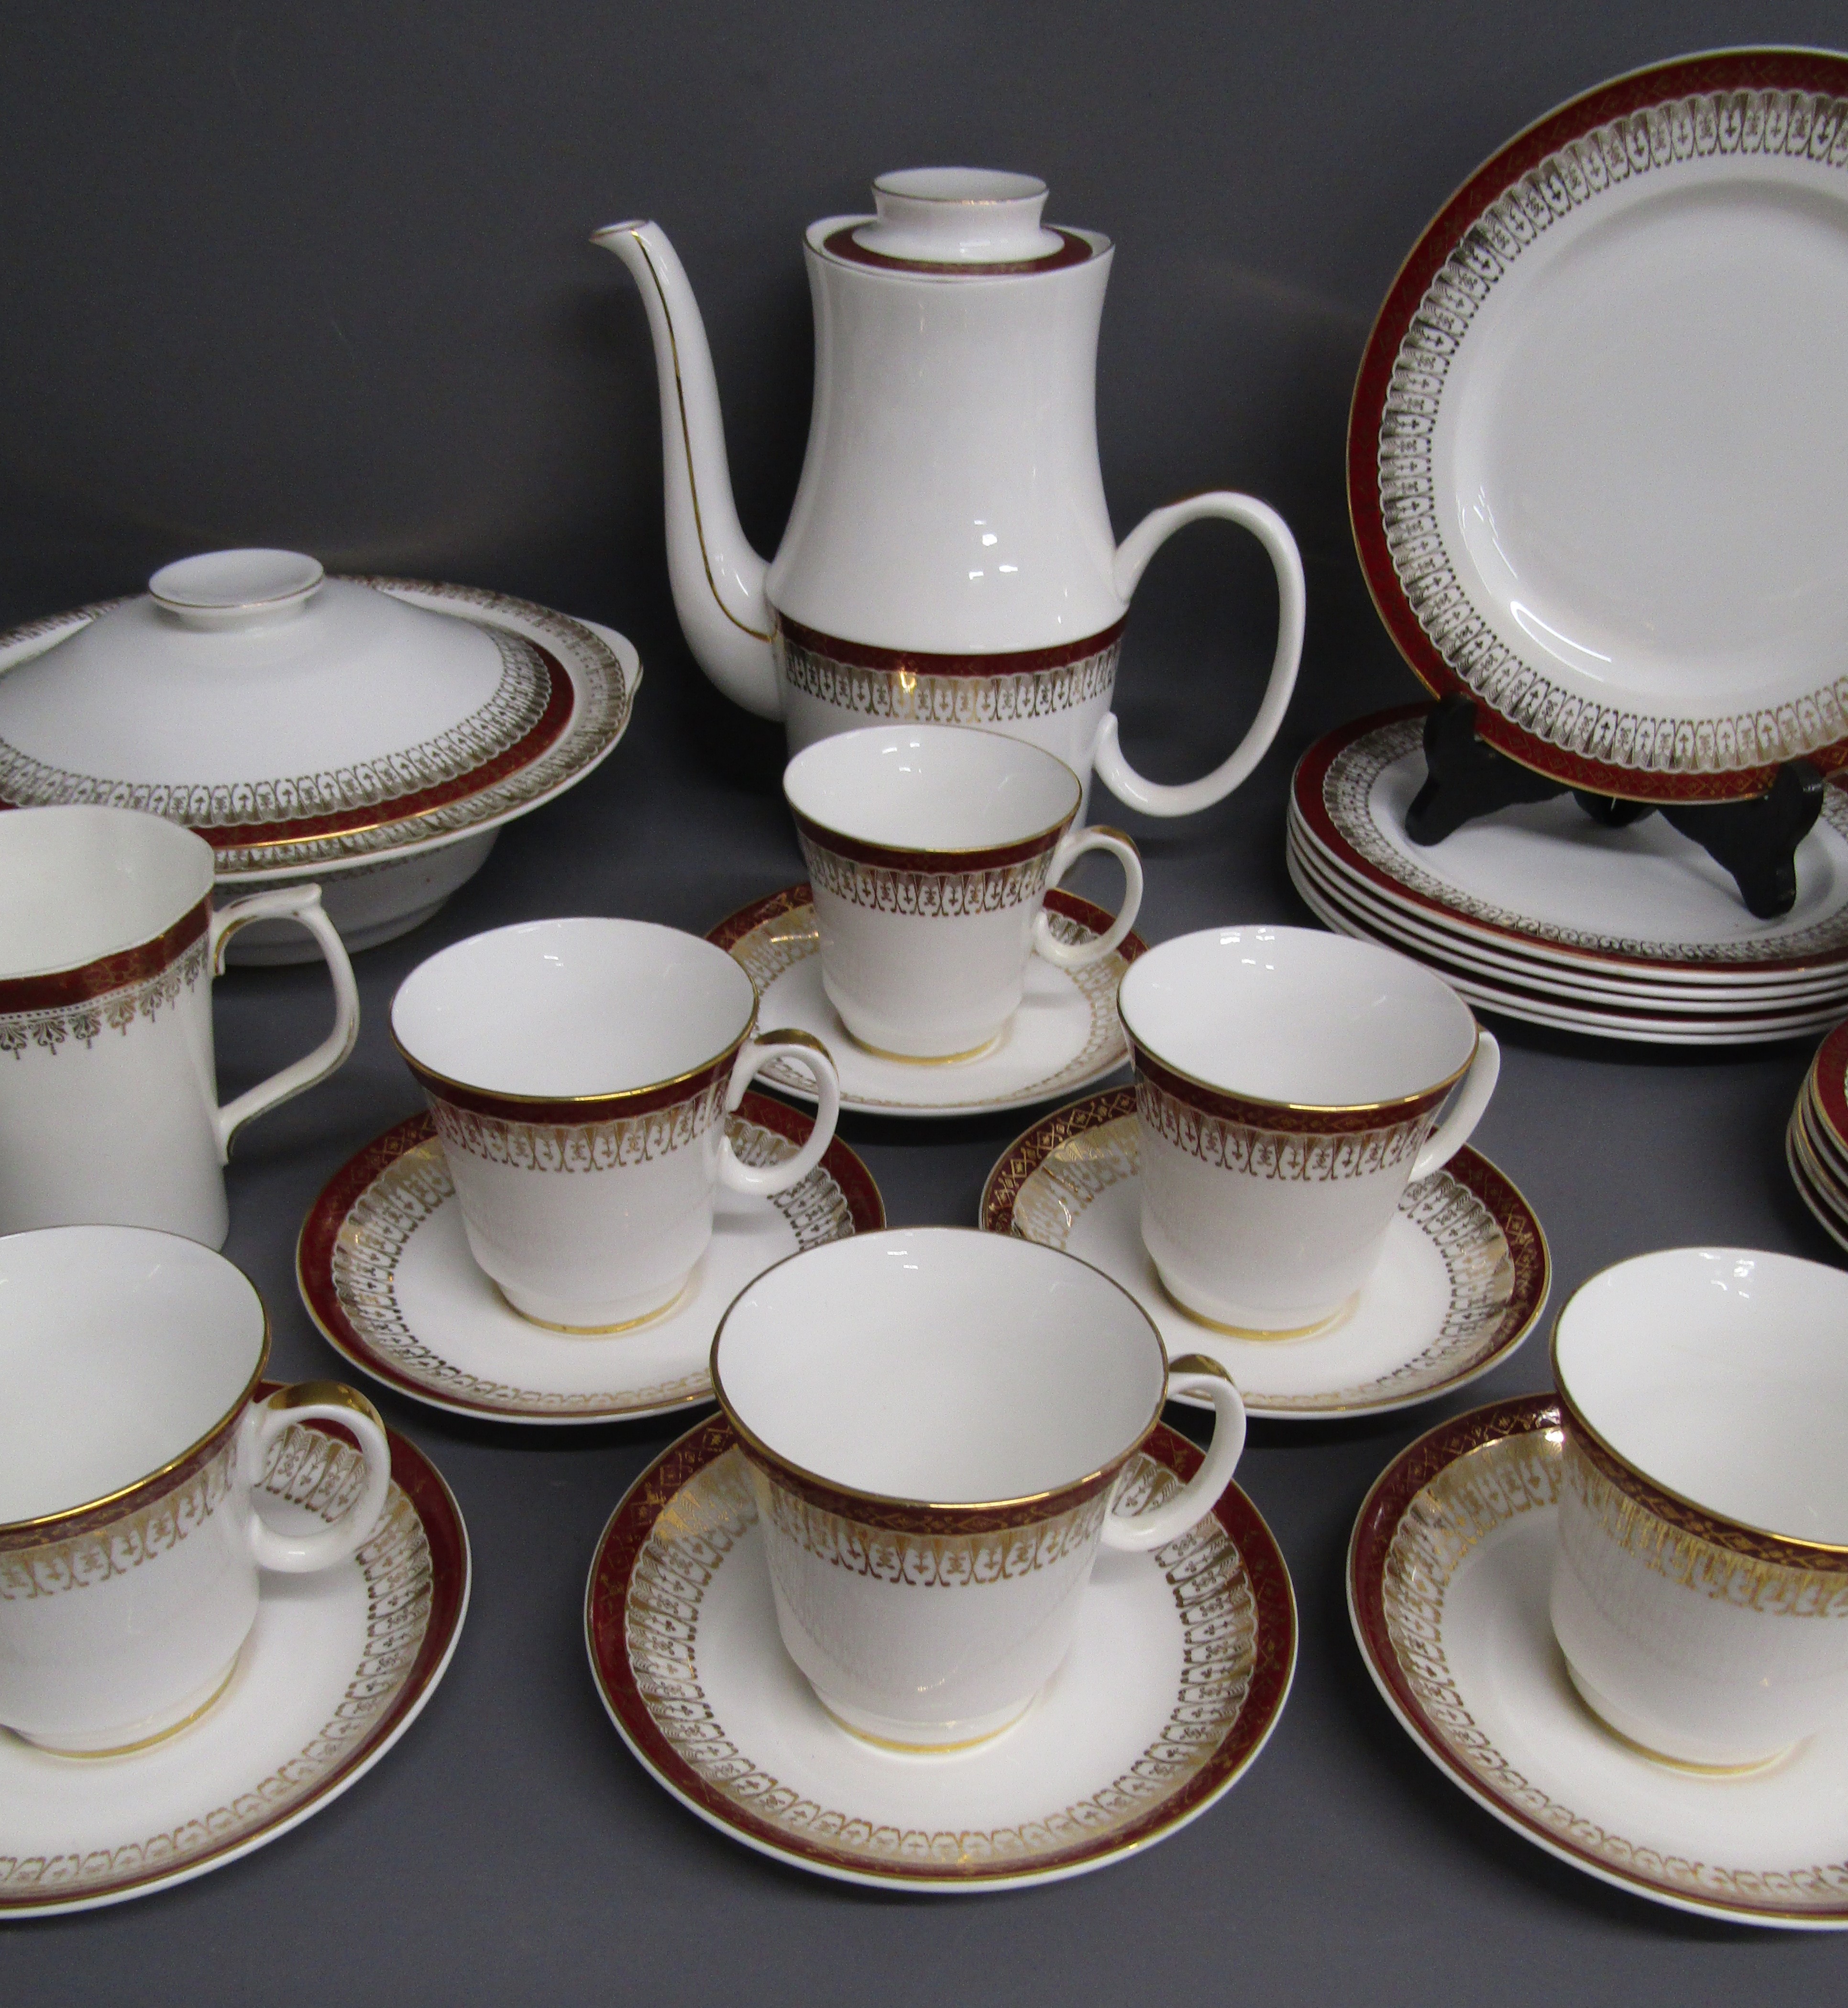 Royal Grafton 'Majestic' tea set with side plates and 20.5cm plates, tureens and gravy boat - Image 3 of 5